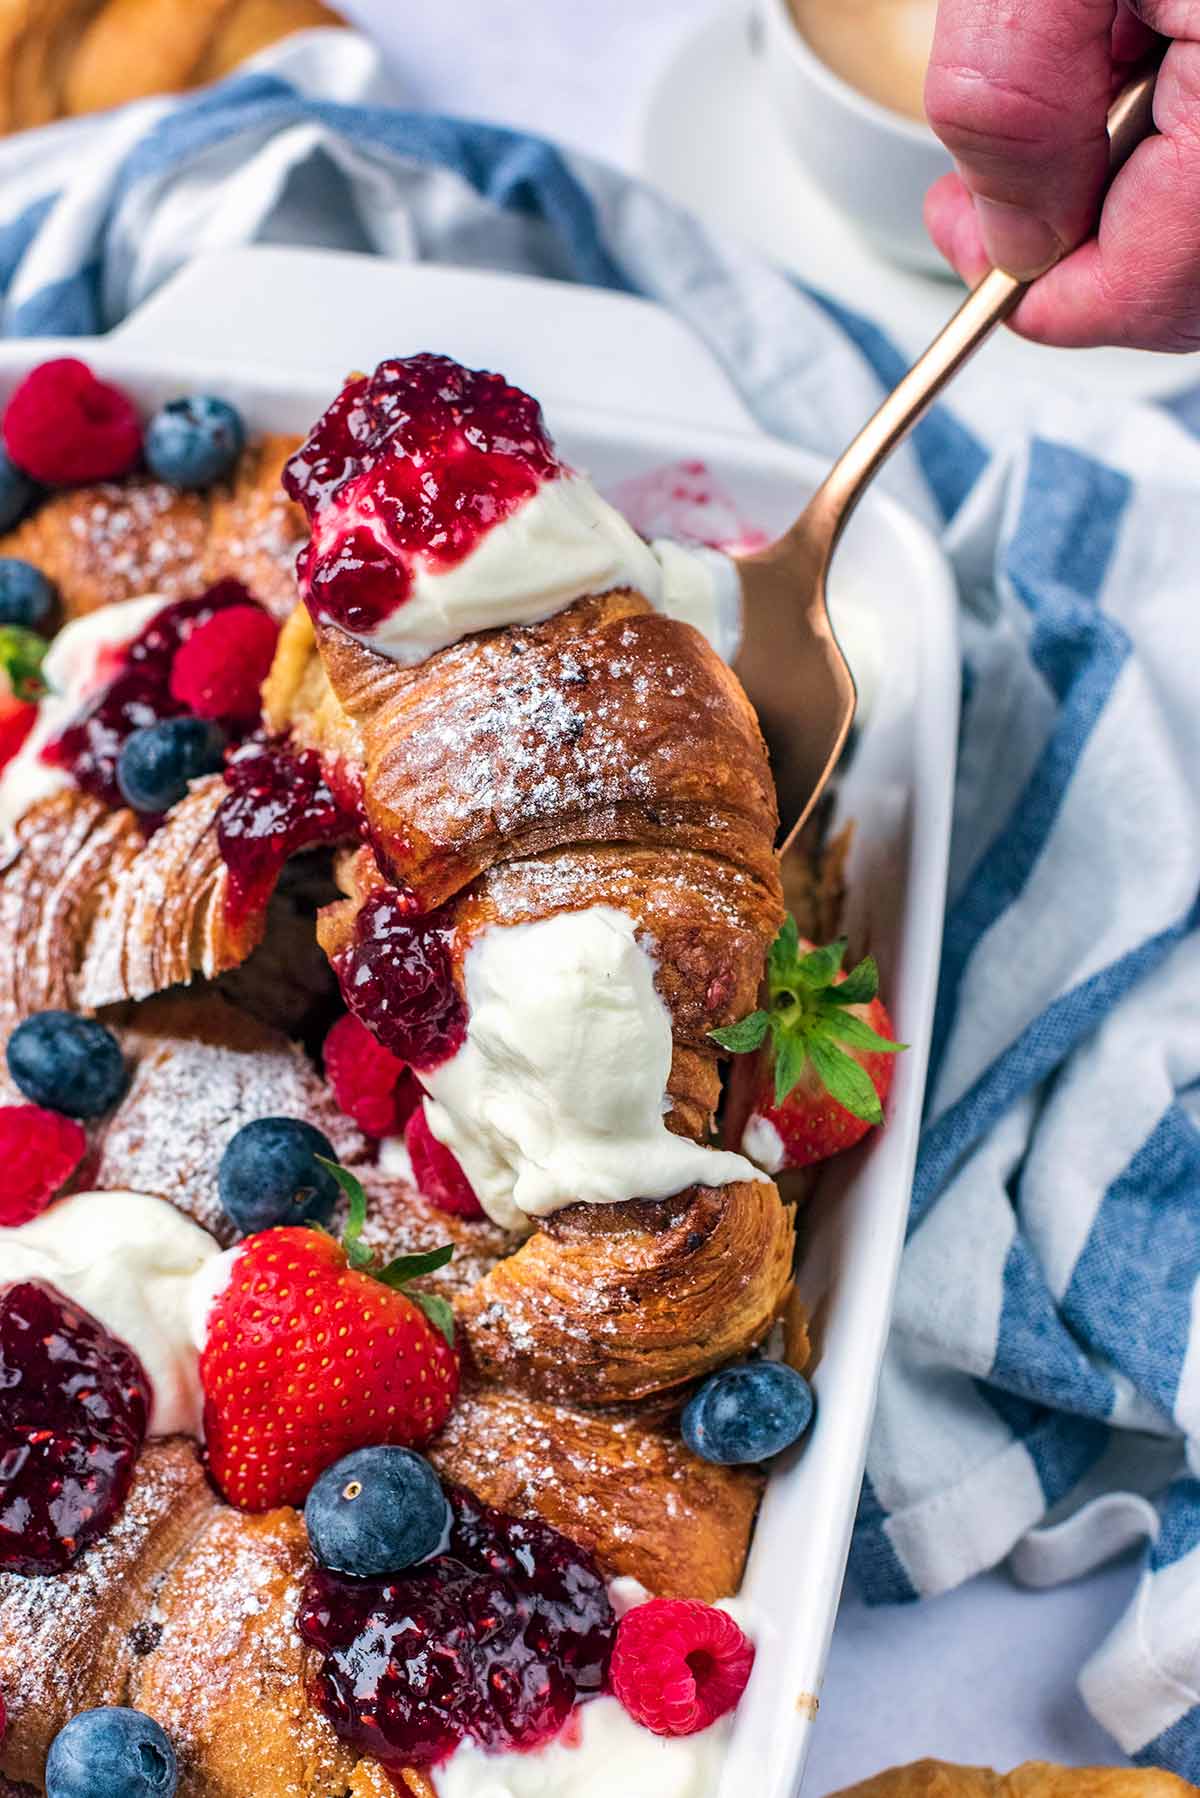 A spoon lifting out some baked croissant from a baking dish.